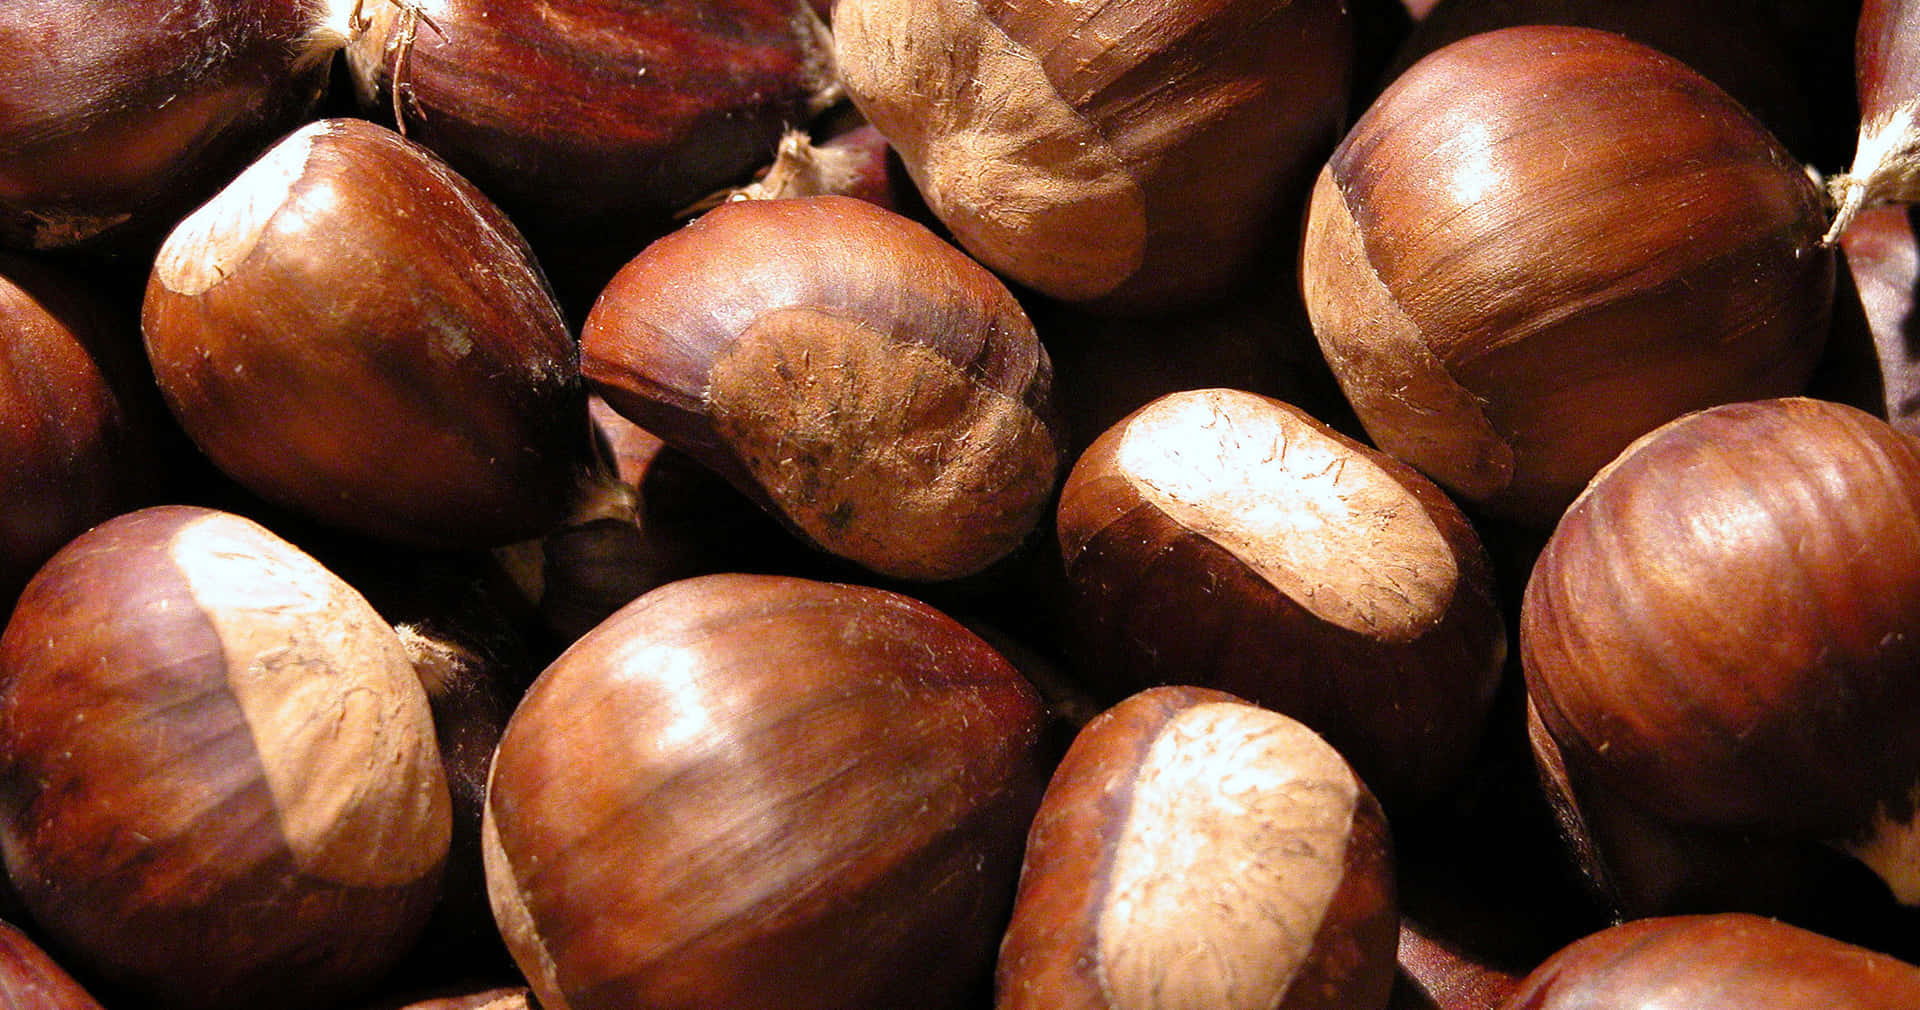 Caption: Beautiful Close-up View of a Chestnut Wallpaper